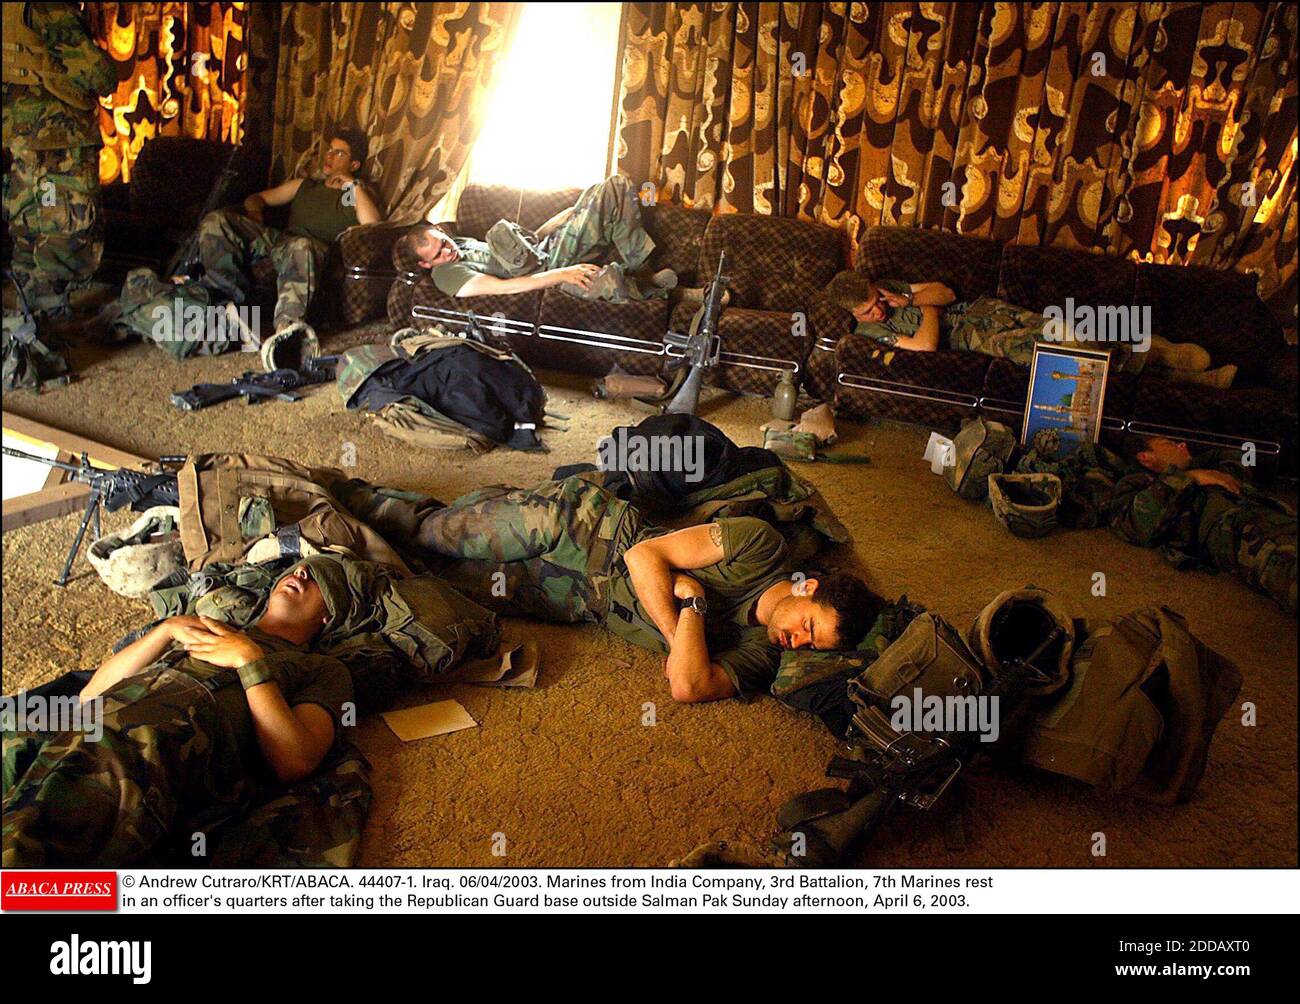 NO FILM, NO VIDEO, NO TV, NO DOCUMENTARY - © Andrew Cutraro/KRT/ABACA. 44407-1. Iraq. 06/04/2003. Marines from India Company, 3rd Battalion, 7th Marines rest in an officer's quarters after taking the Republican Guard base outside Salman Pak Sunday afternoon, April 6, 2003. Stock Photo